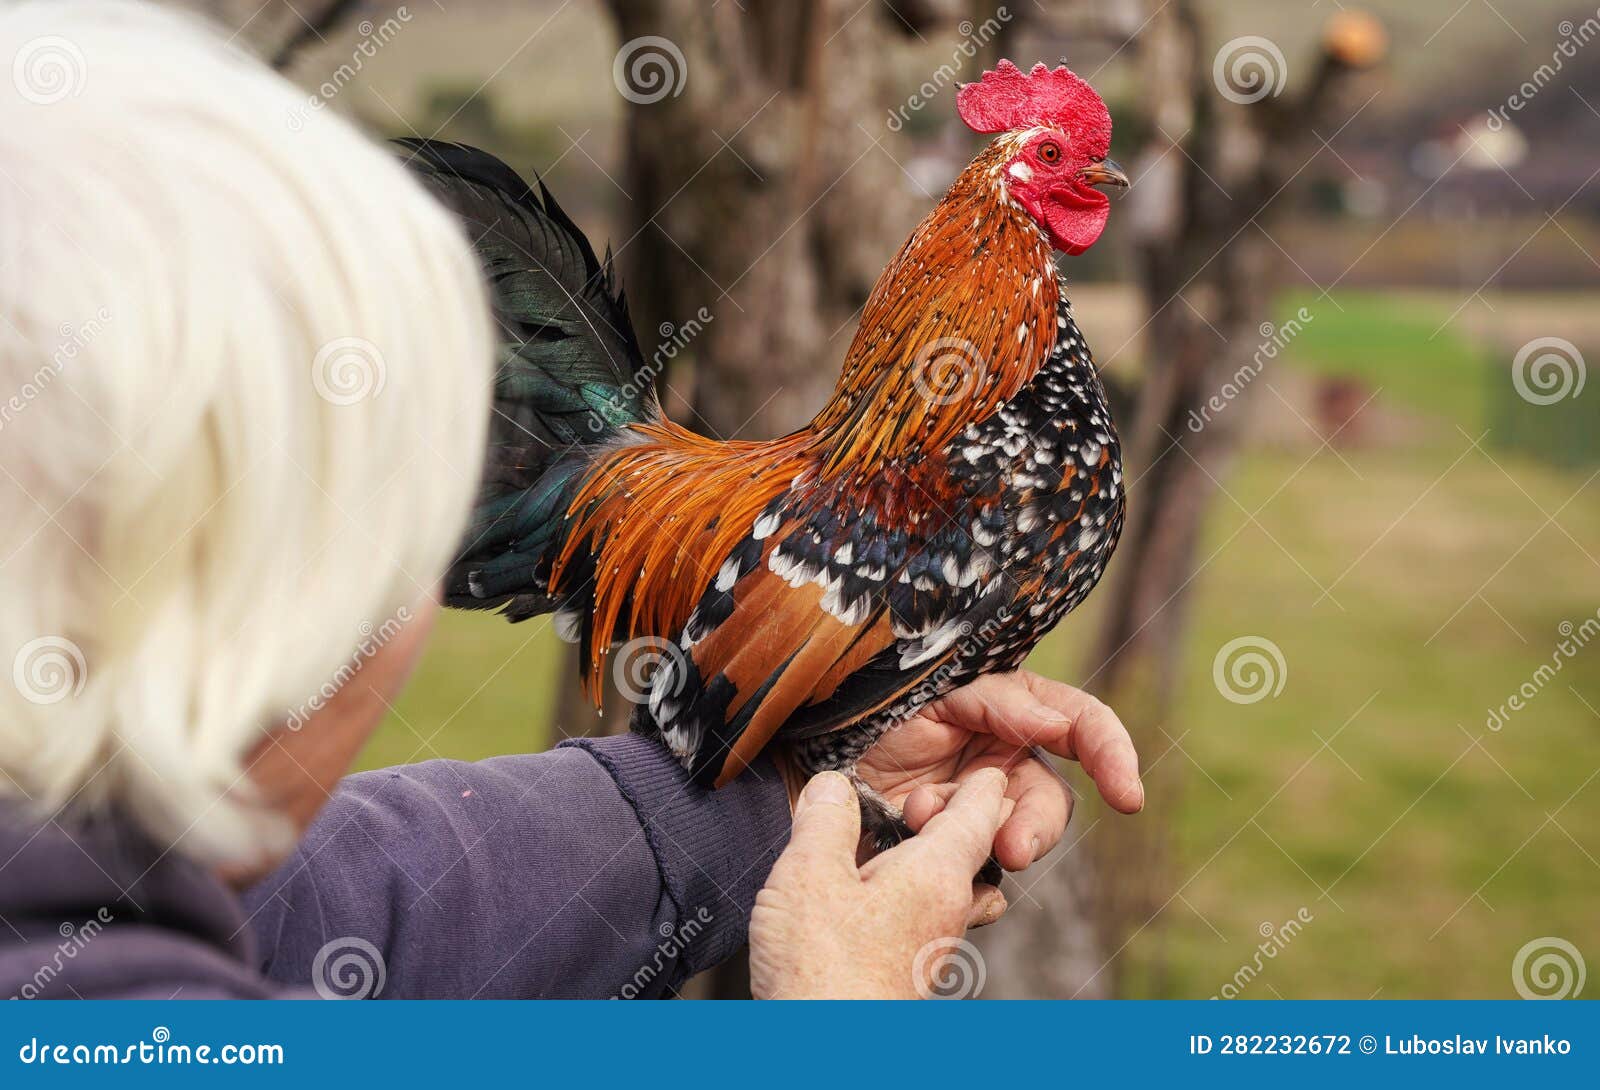 Small Bantam Chicken Rooster with Bright Red Comb and Green Tail, Posing on  Older Unrecognizable White Hair Woman Arm Stock Photo - Image of pose,  beautiful: 282232672